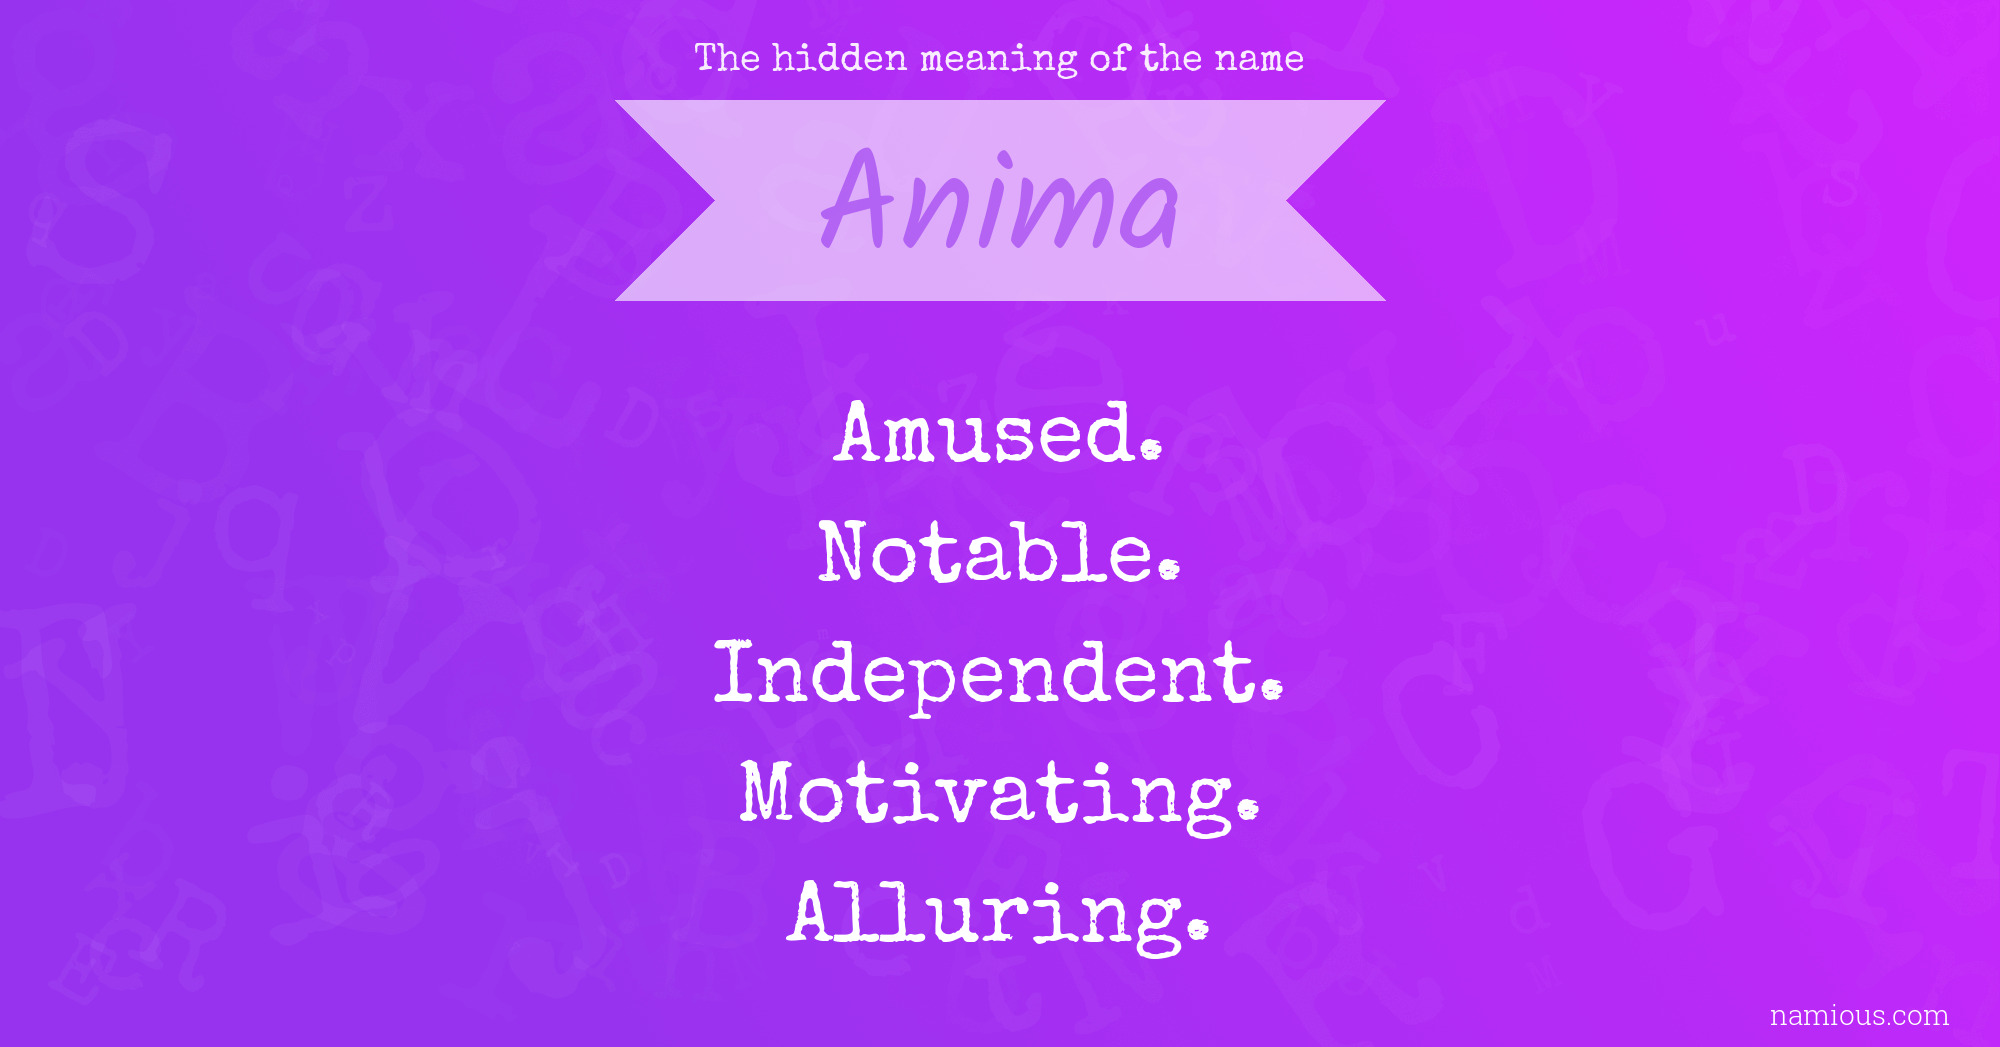 The hidden meaning of the name Anima